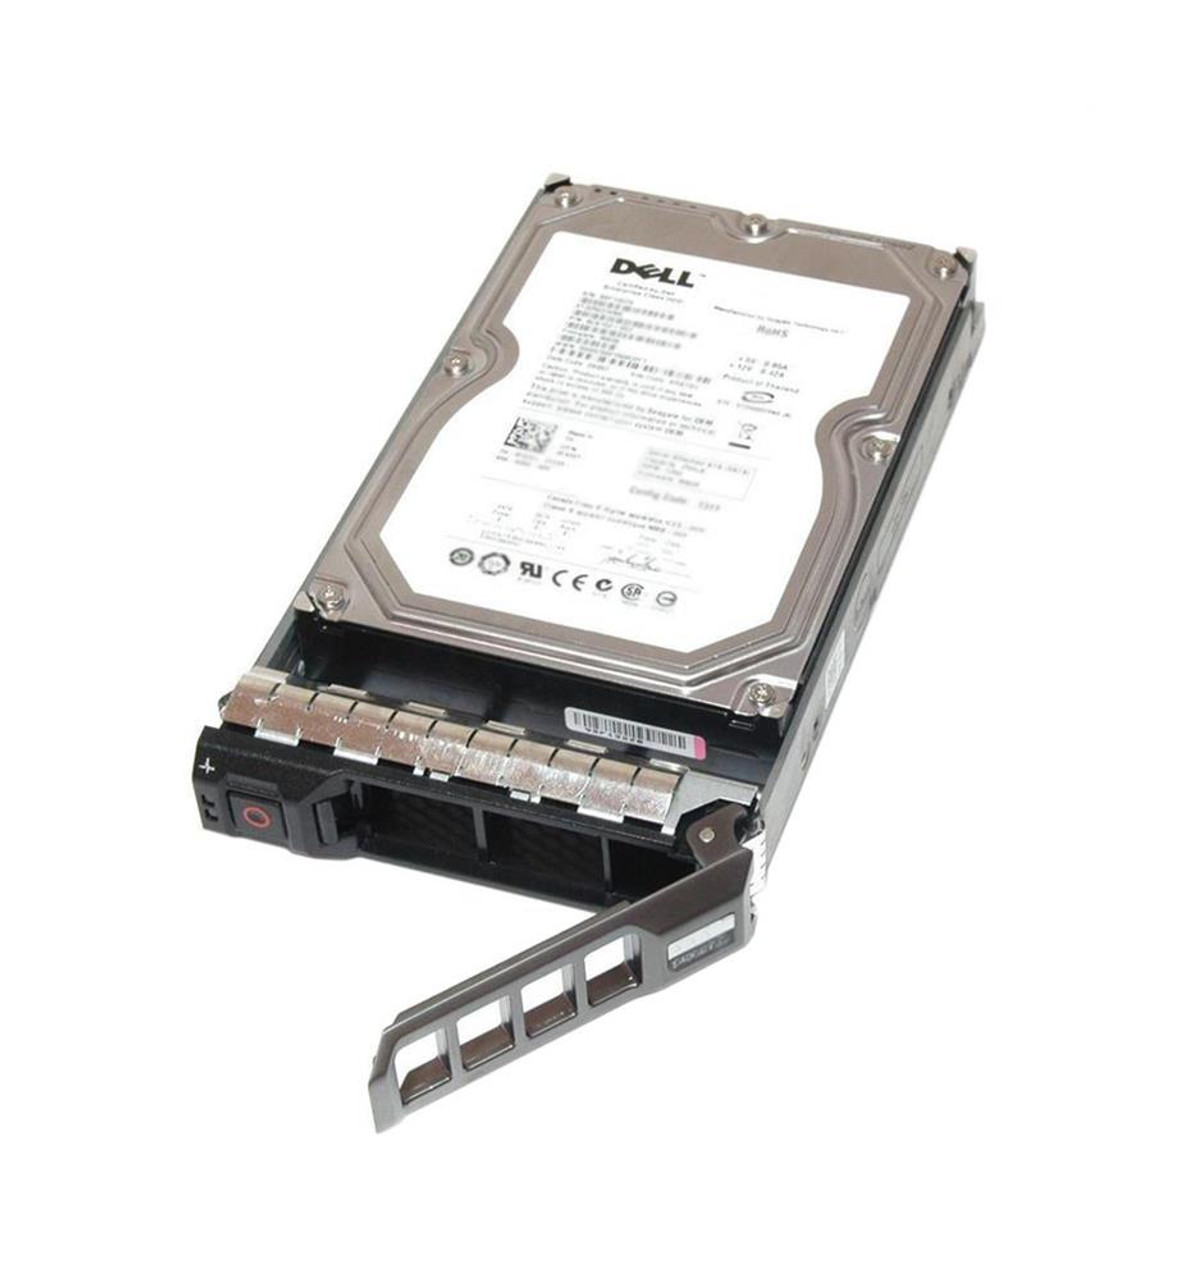 KVW2X Dell 12TB 7200RPM SATA 6Gbps Hot Swap 256MB Cache (512e) 3.5-inch Internal Hard Drive with Tray